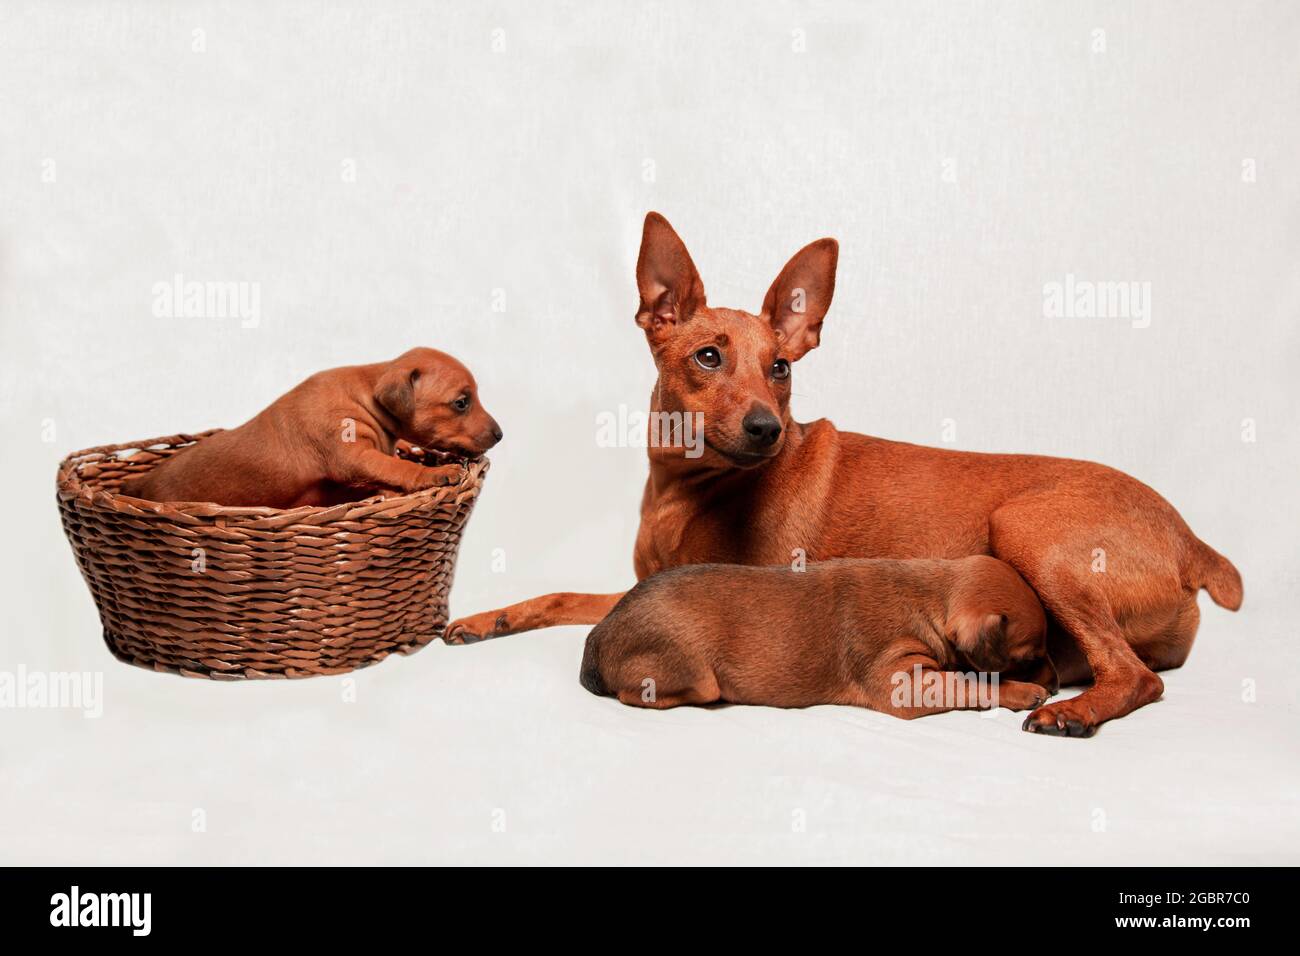 A puppy in a wicker basket. Mothers and babies. Charming pets. Cute animals. Small dogs with a big dog on a white background.  Stock Photo